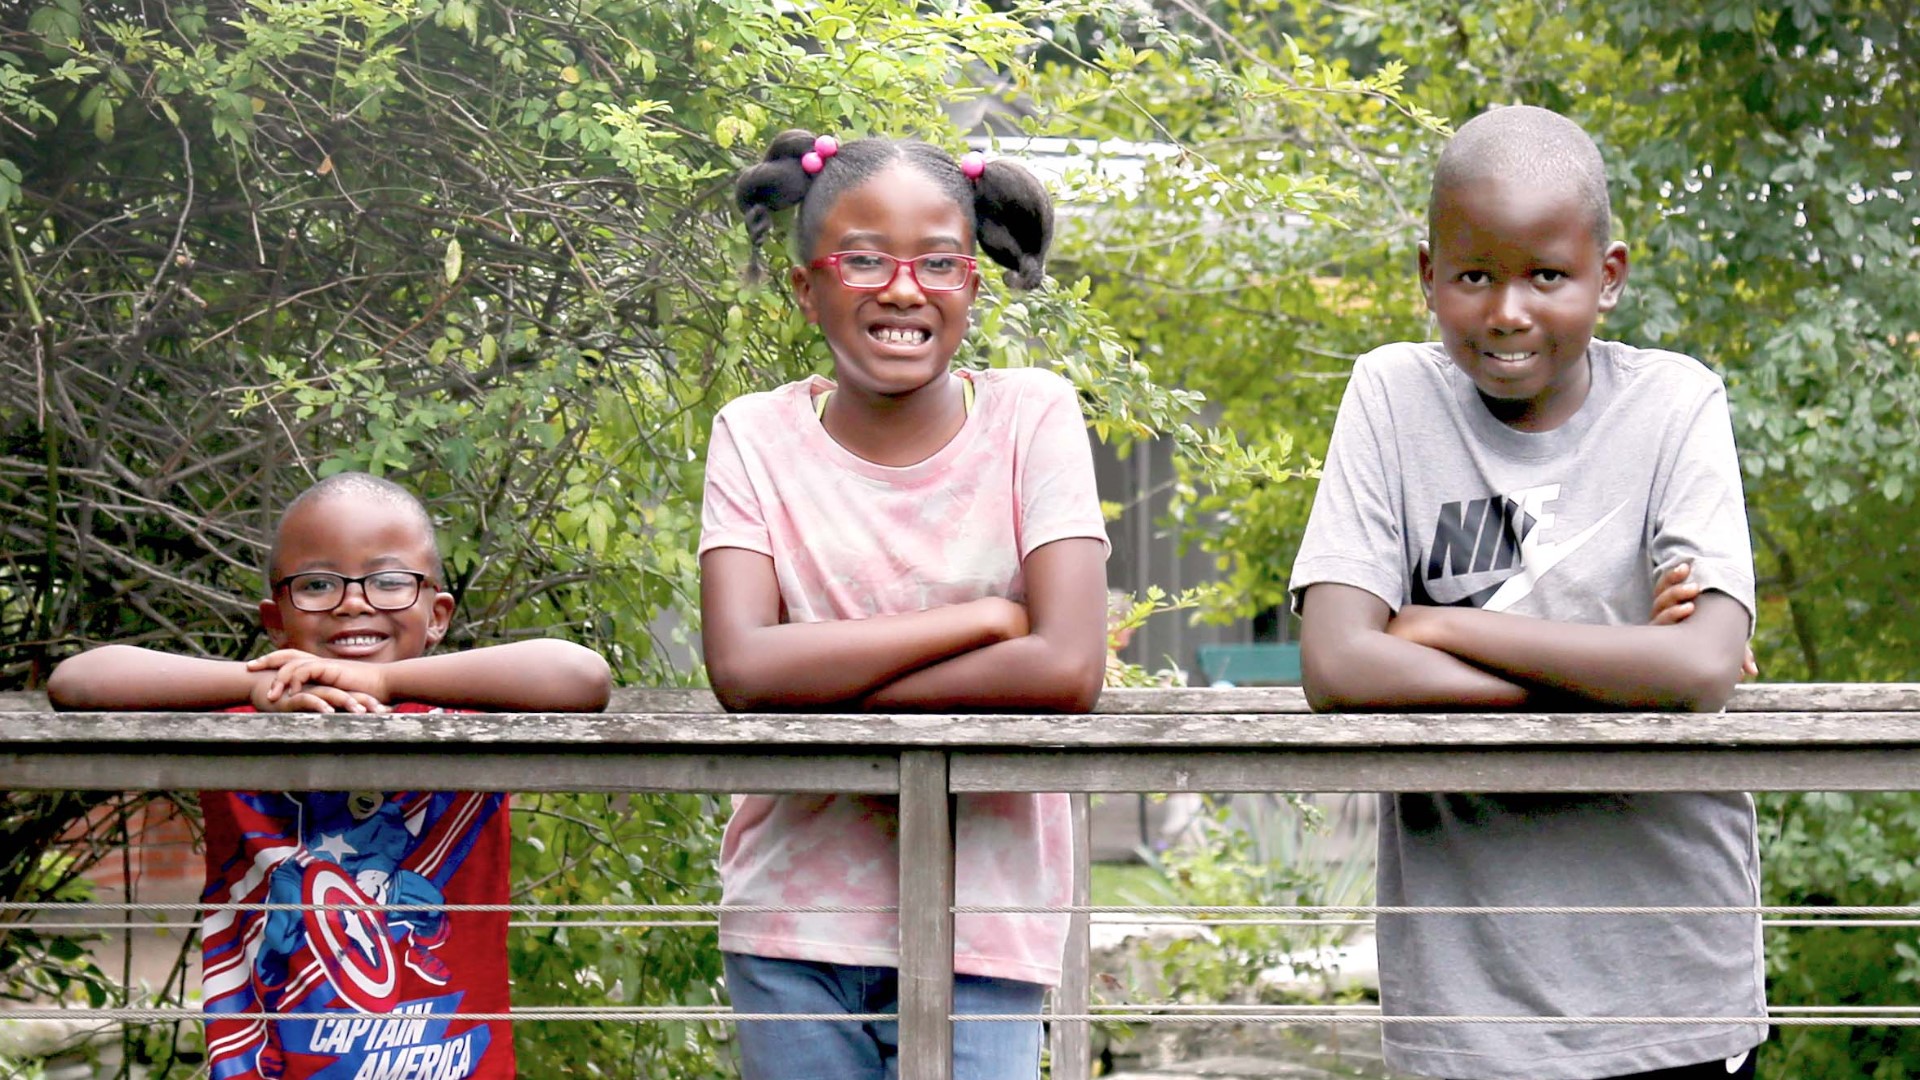 Imani, Zoey and Kylon share an unbreakable bond and it shows when they are together, whether they are completing obstacle courses or playing games.